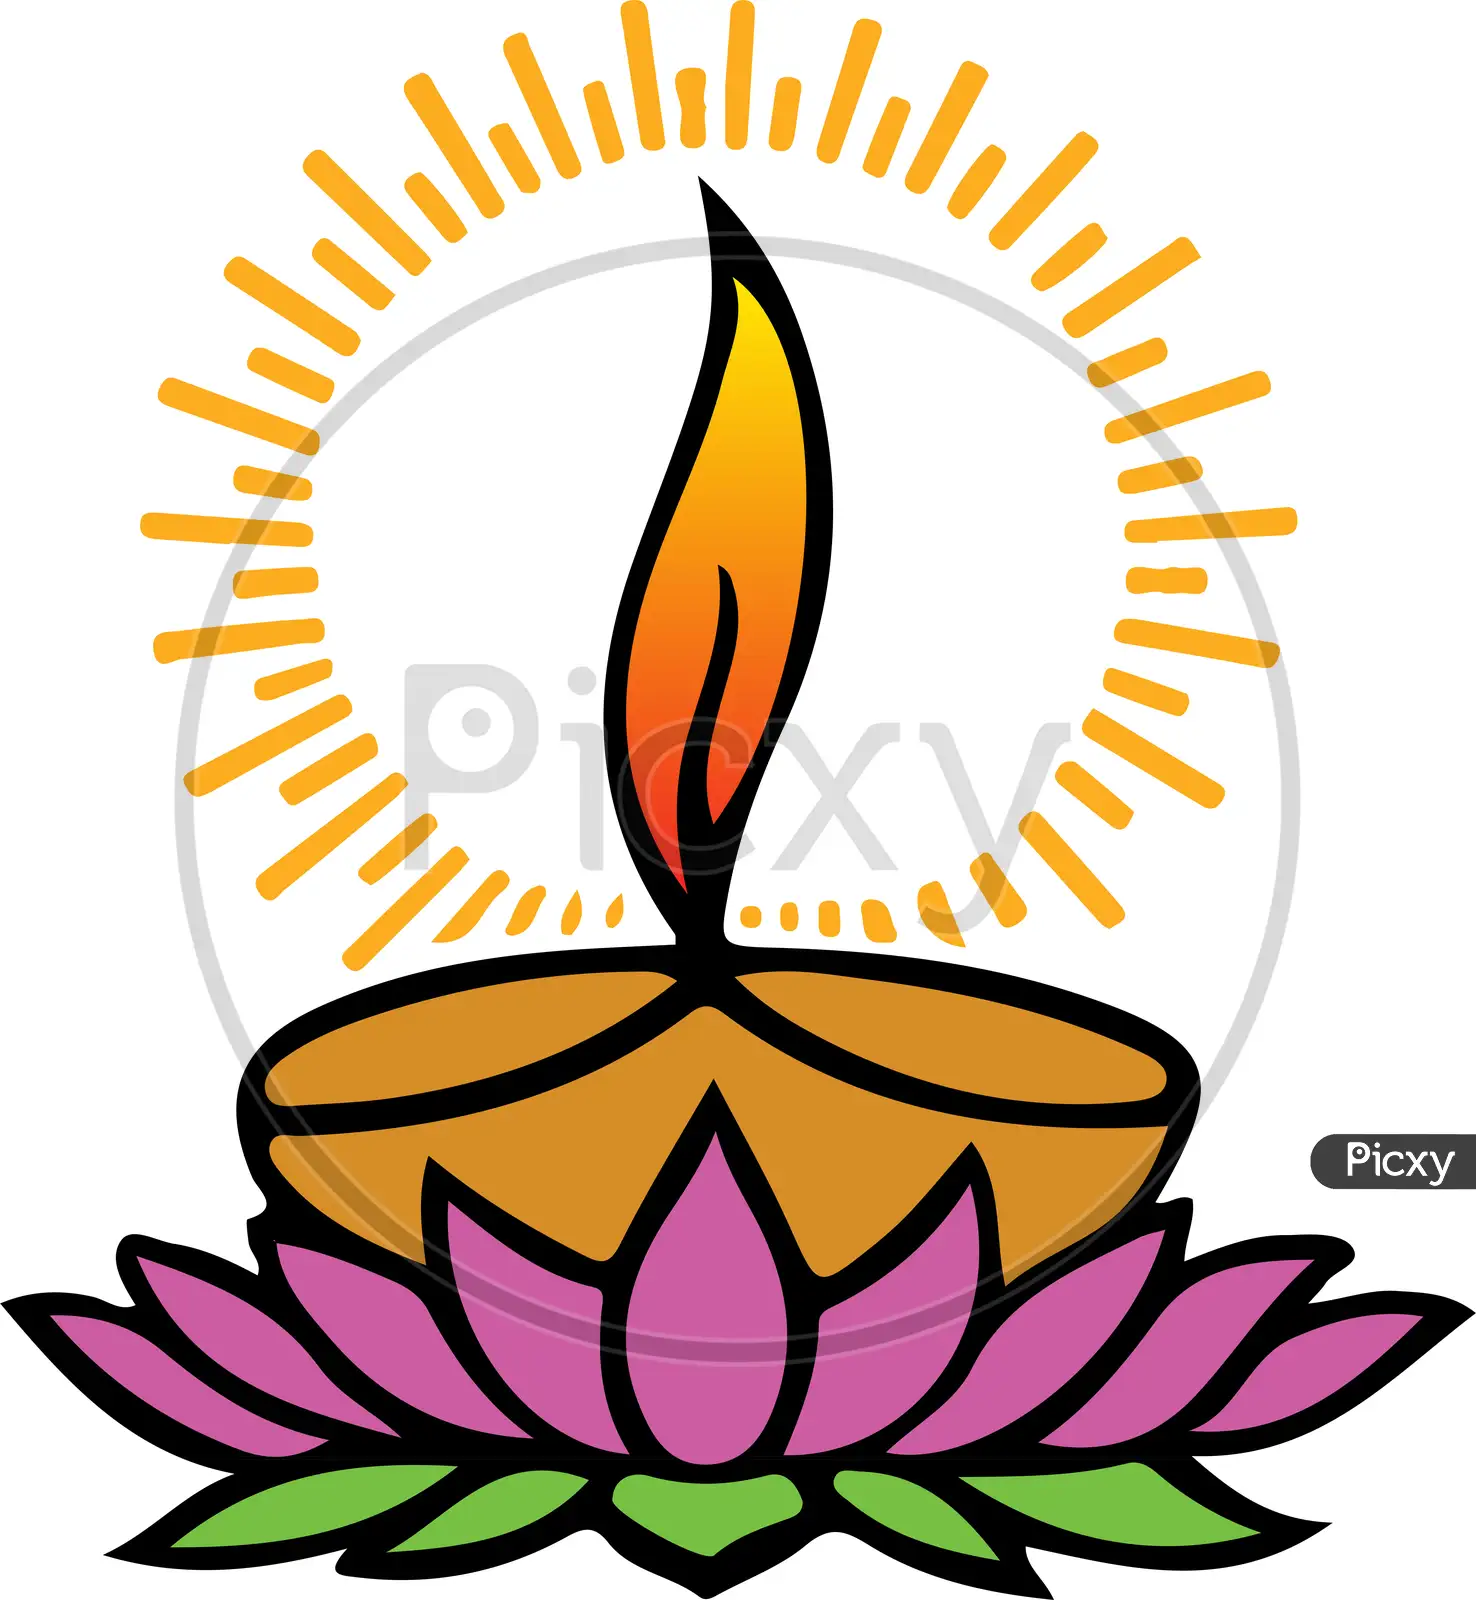 Buy woopme® Beautiful Decorative Rangoli Deepam Sticker for Home Door  Entrance Pooja Room Decor Office Hall Waterproof Multicoloured PVC Vinyl  Stickers (Pack of 6) Online at Low Prices in India - Amazon.in